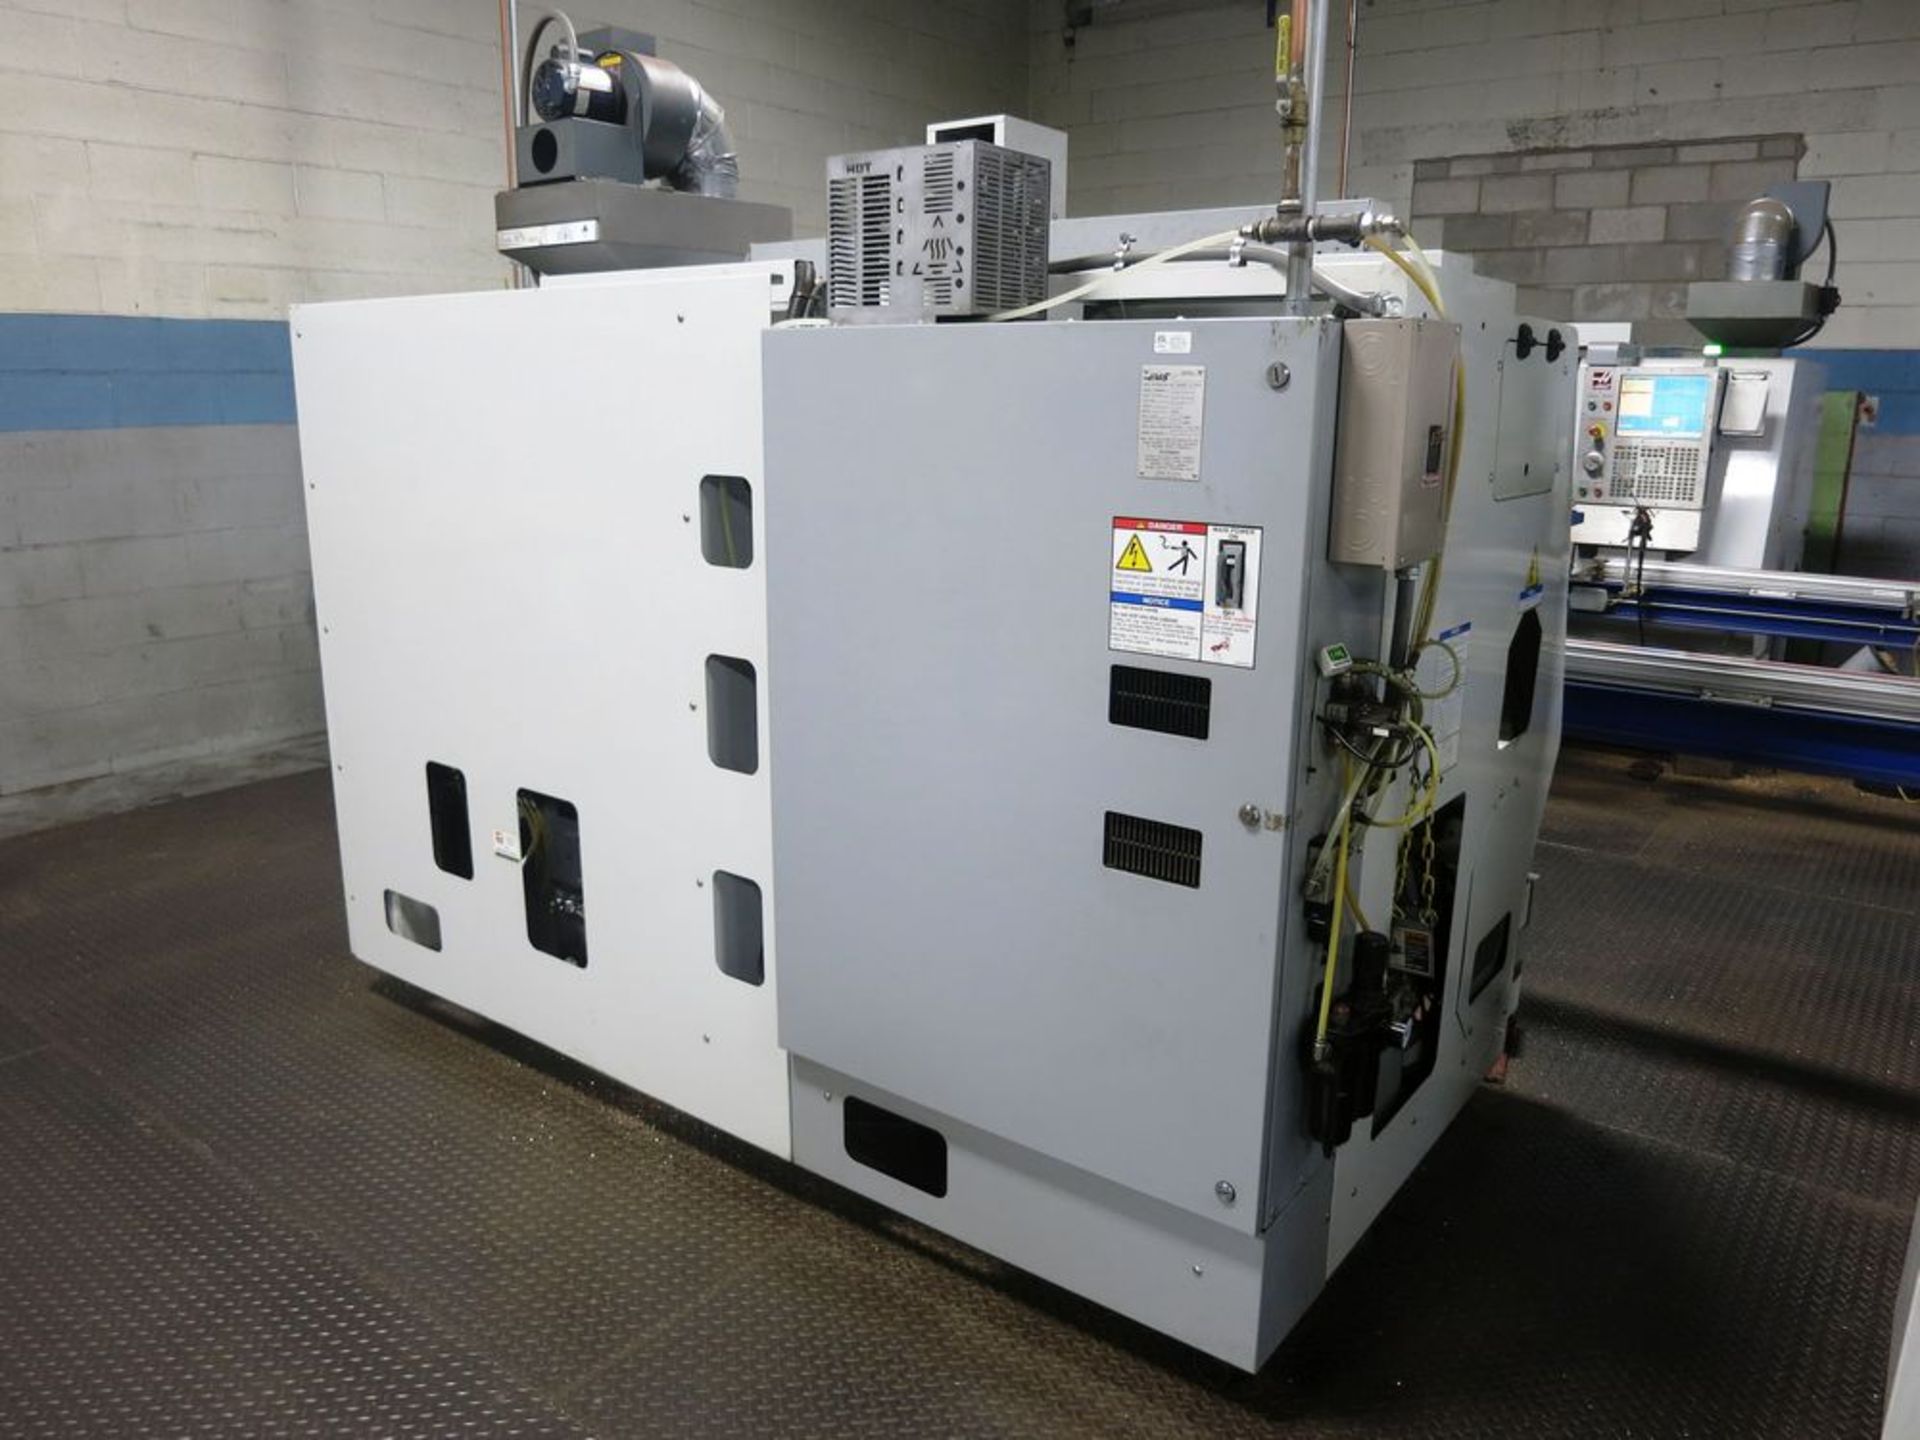 Haas SL-20T CNC 2-Axis Turning Center Lathe W/Epson 6-Axis Material Handling Robot, S/N 3084991, New - Image 7 of 8